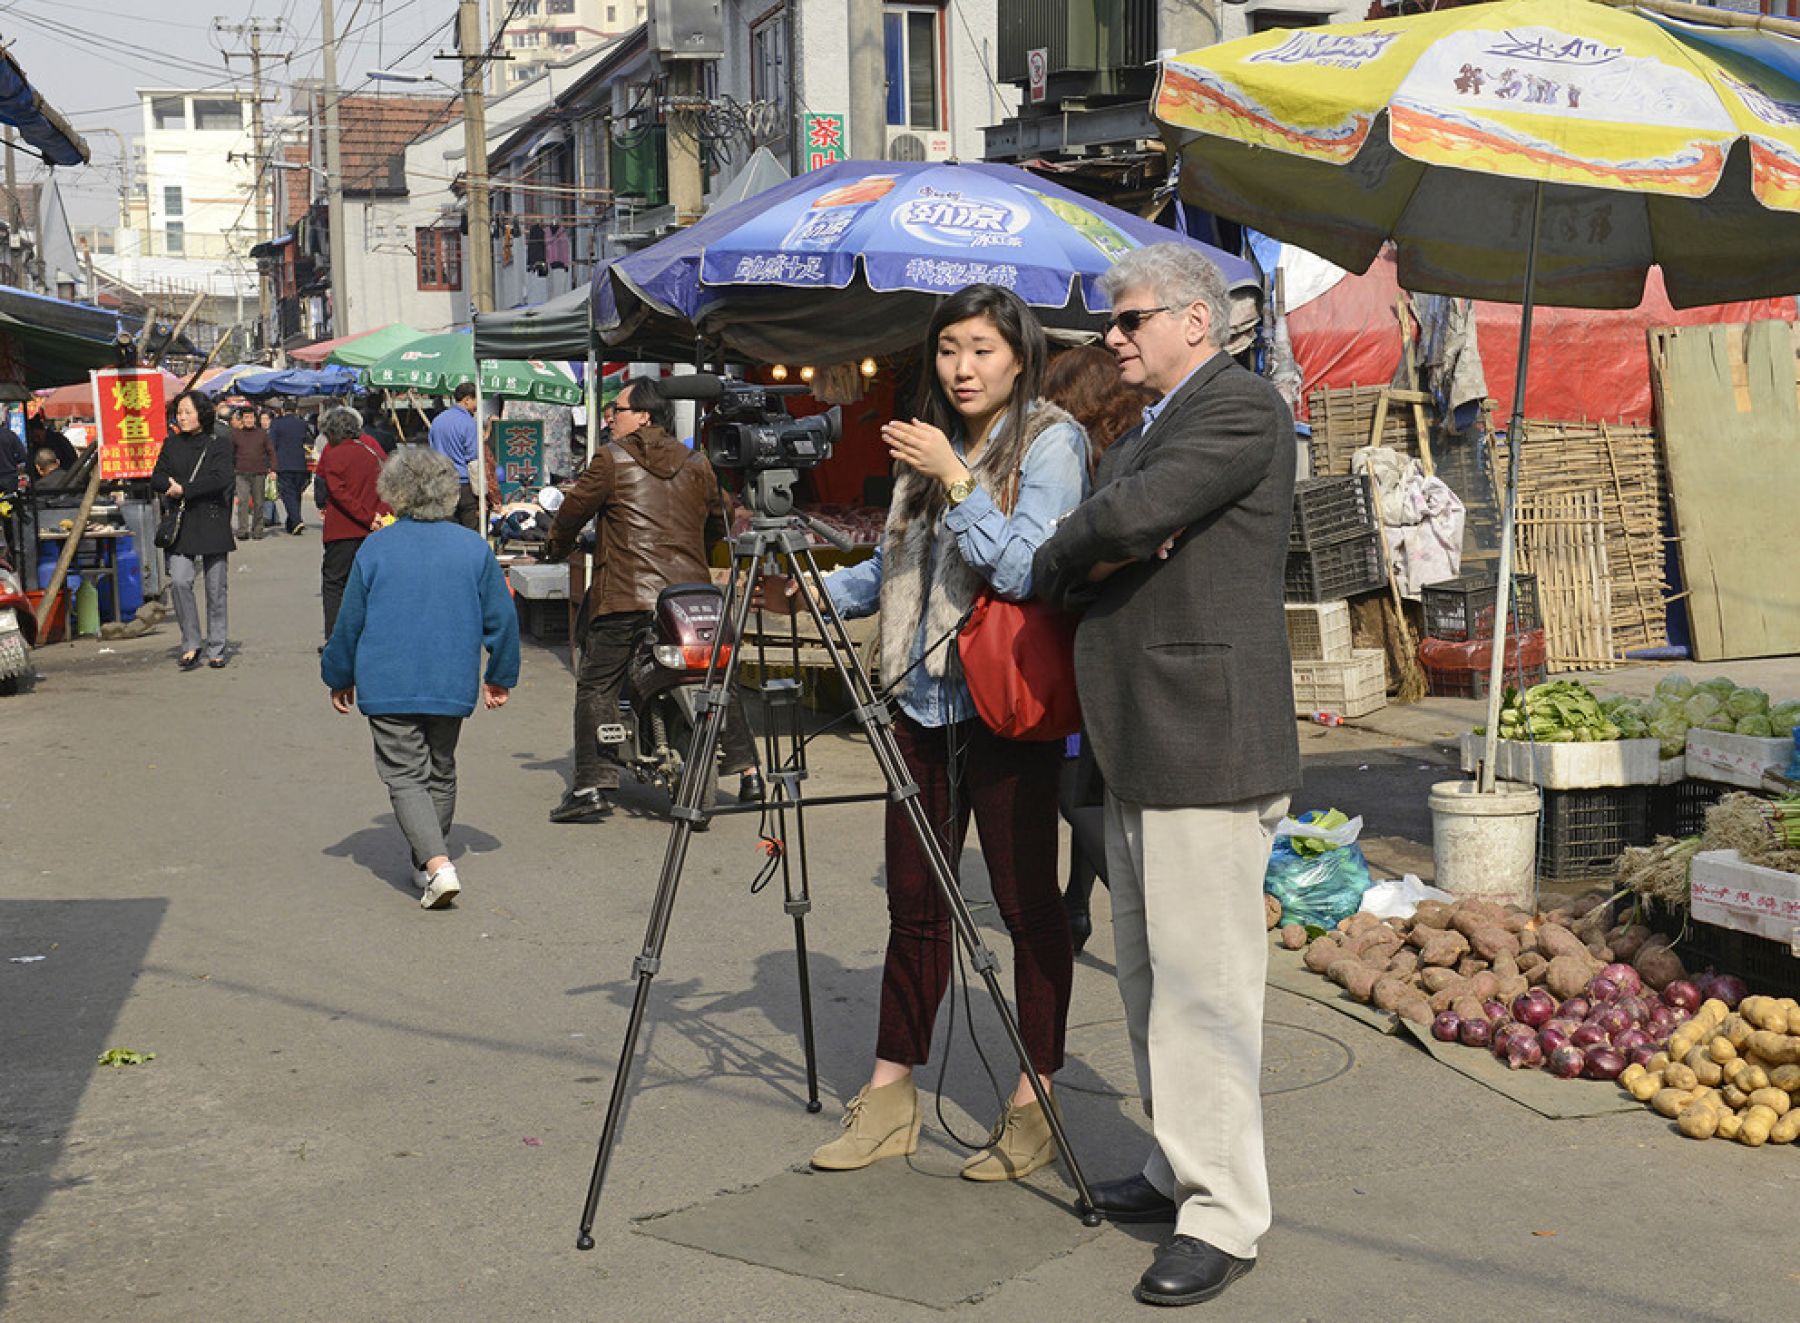 Tony Barbieri and a student on the street reporting with a camera in China.